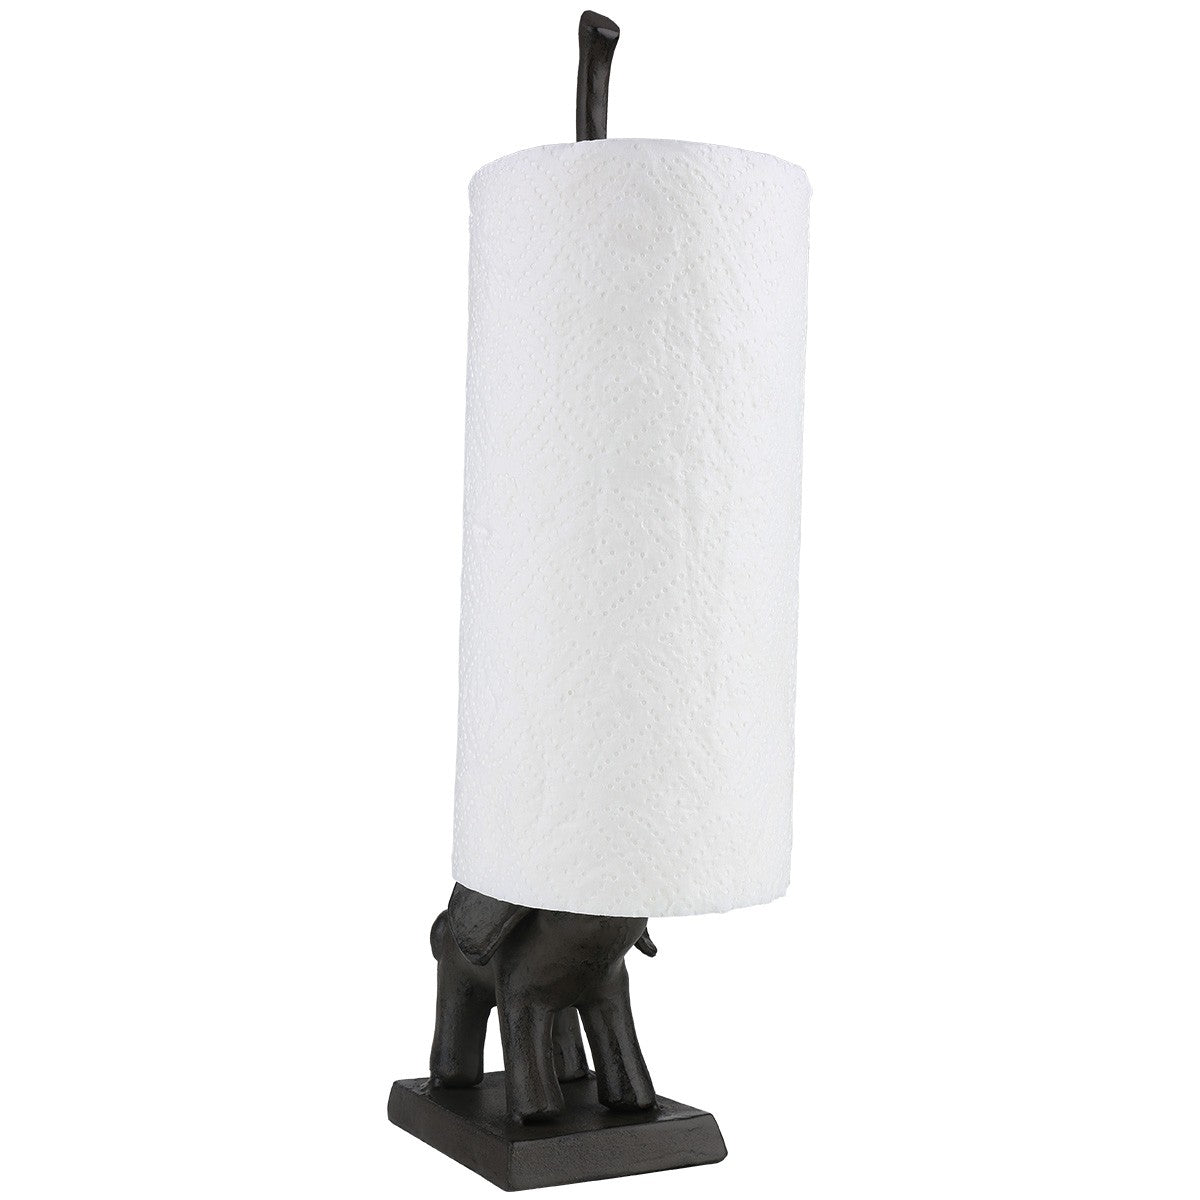 Elephant paper towel holder it funny in your kitchen countertop & decor!